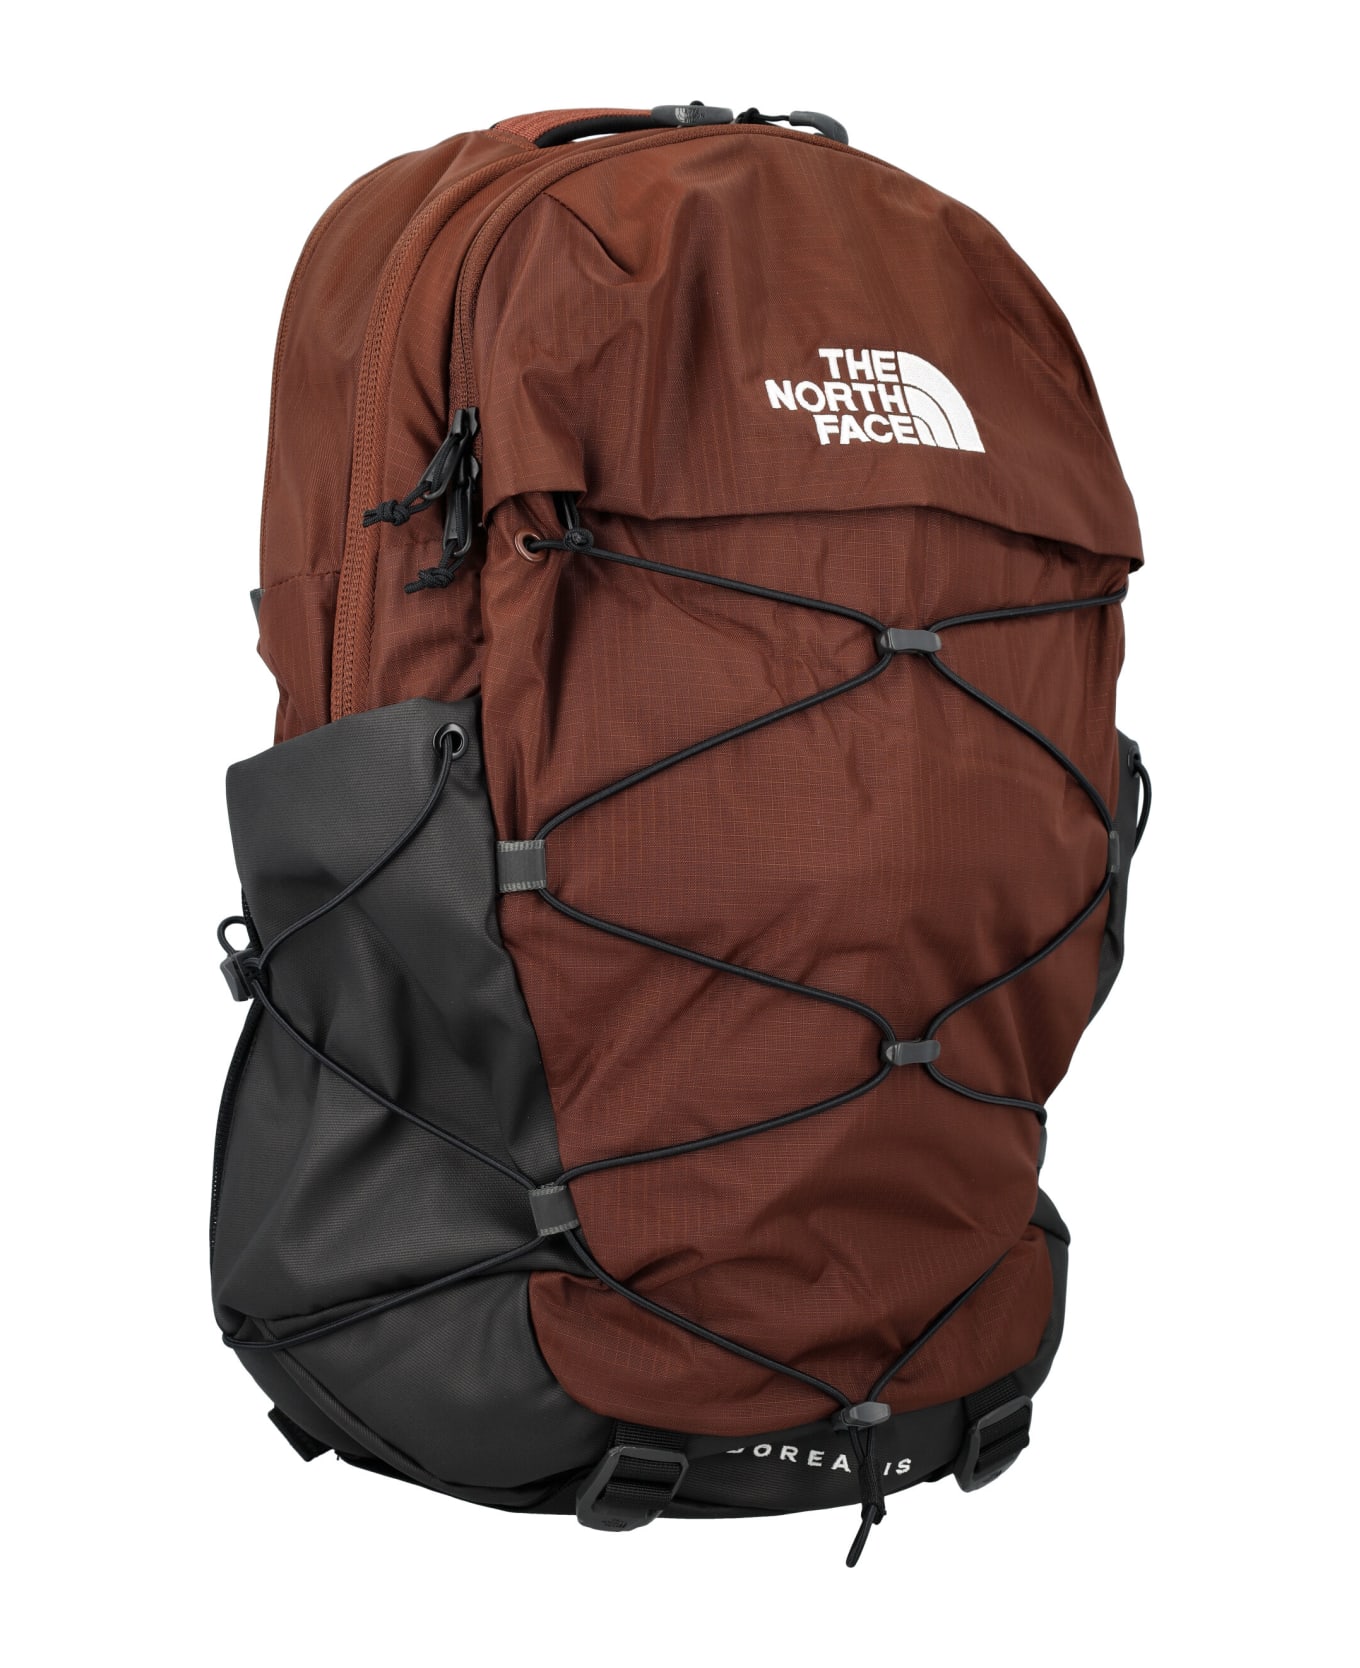 The North Face Borealis Backpack - BROWN